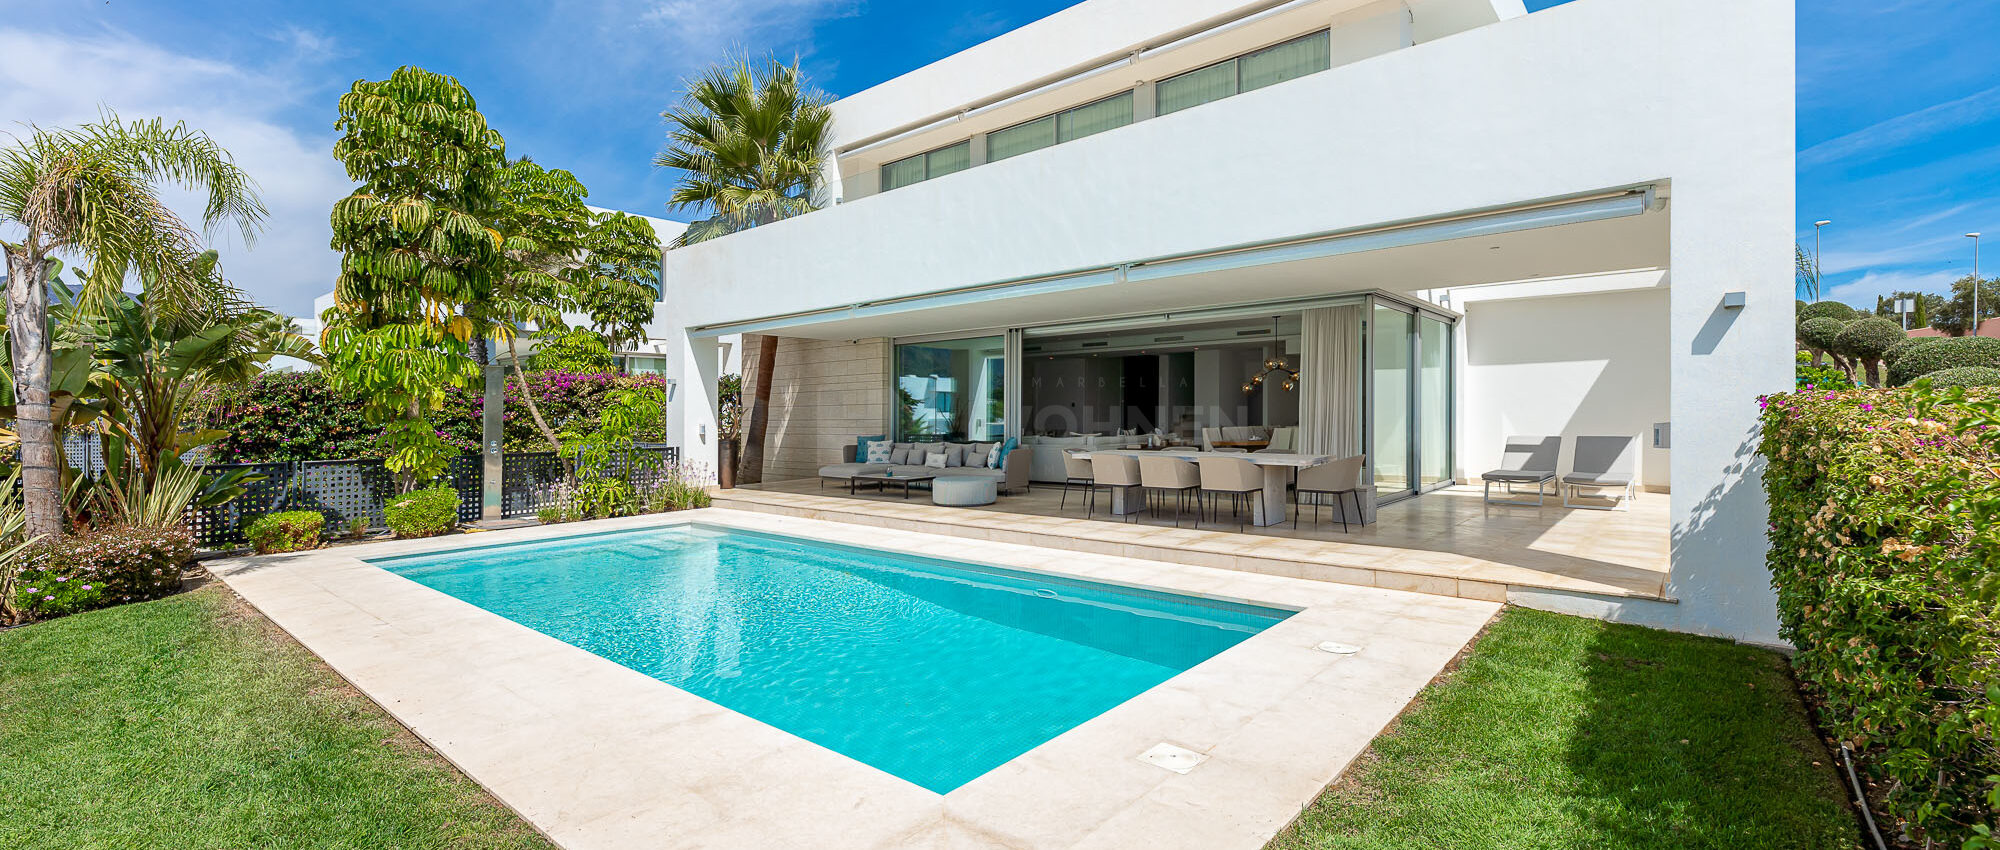 Luxury villa in one of the best areas of Marbella